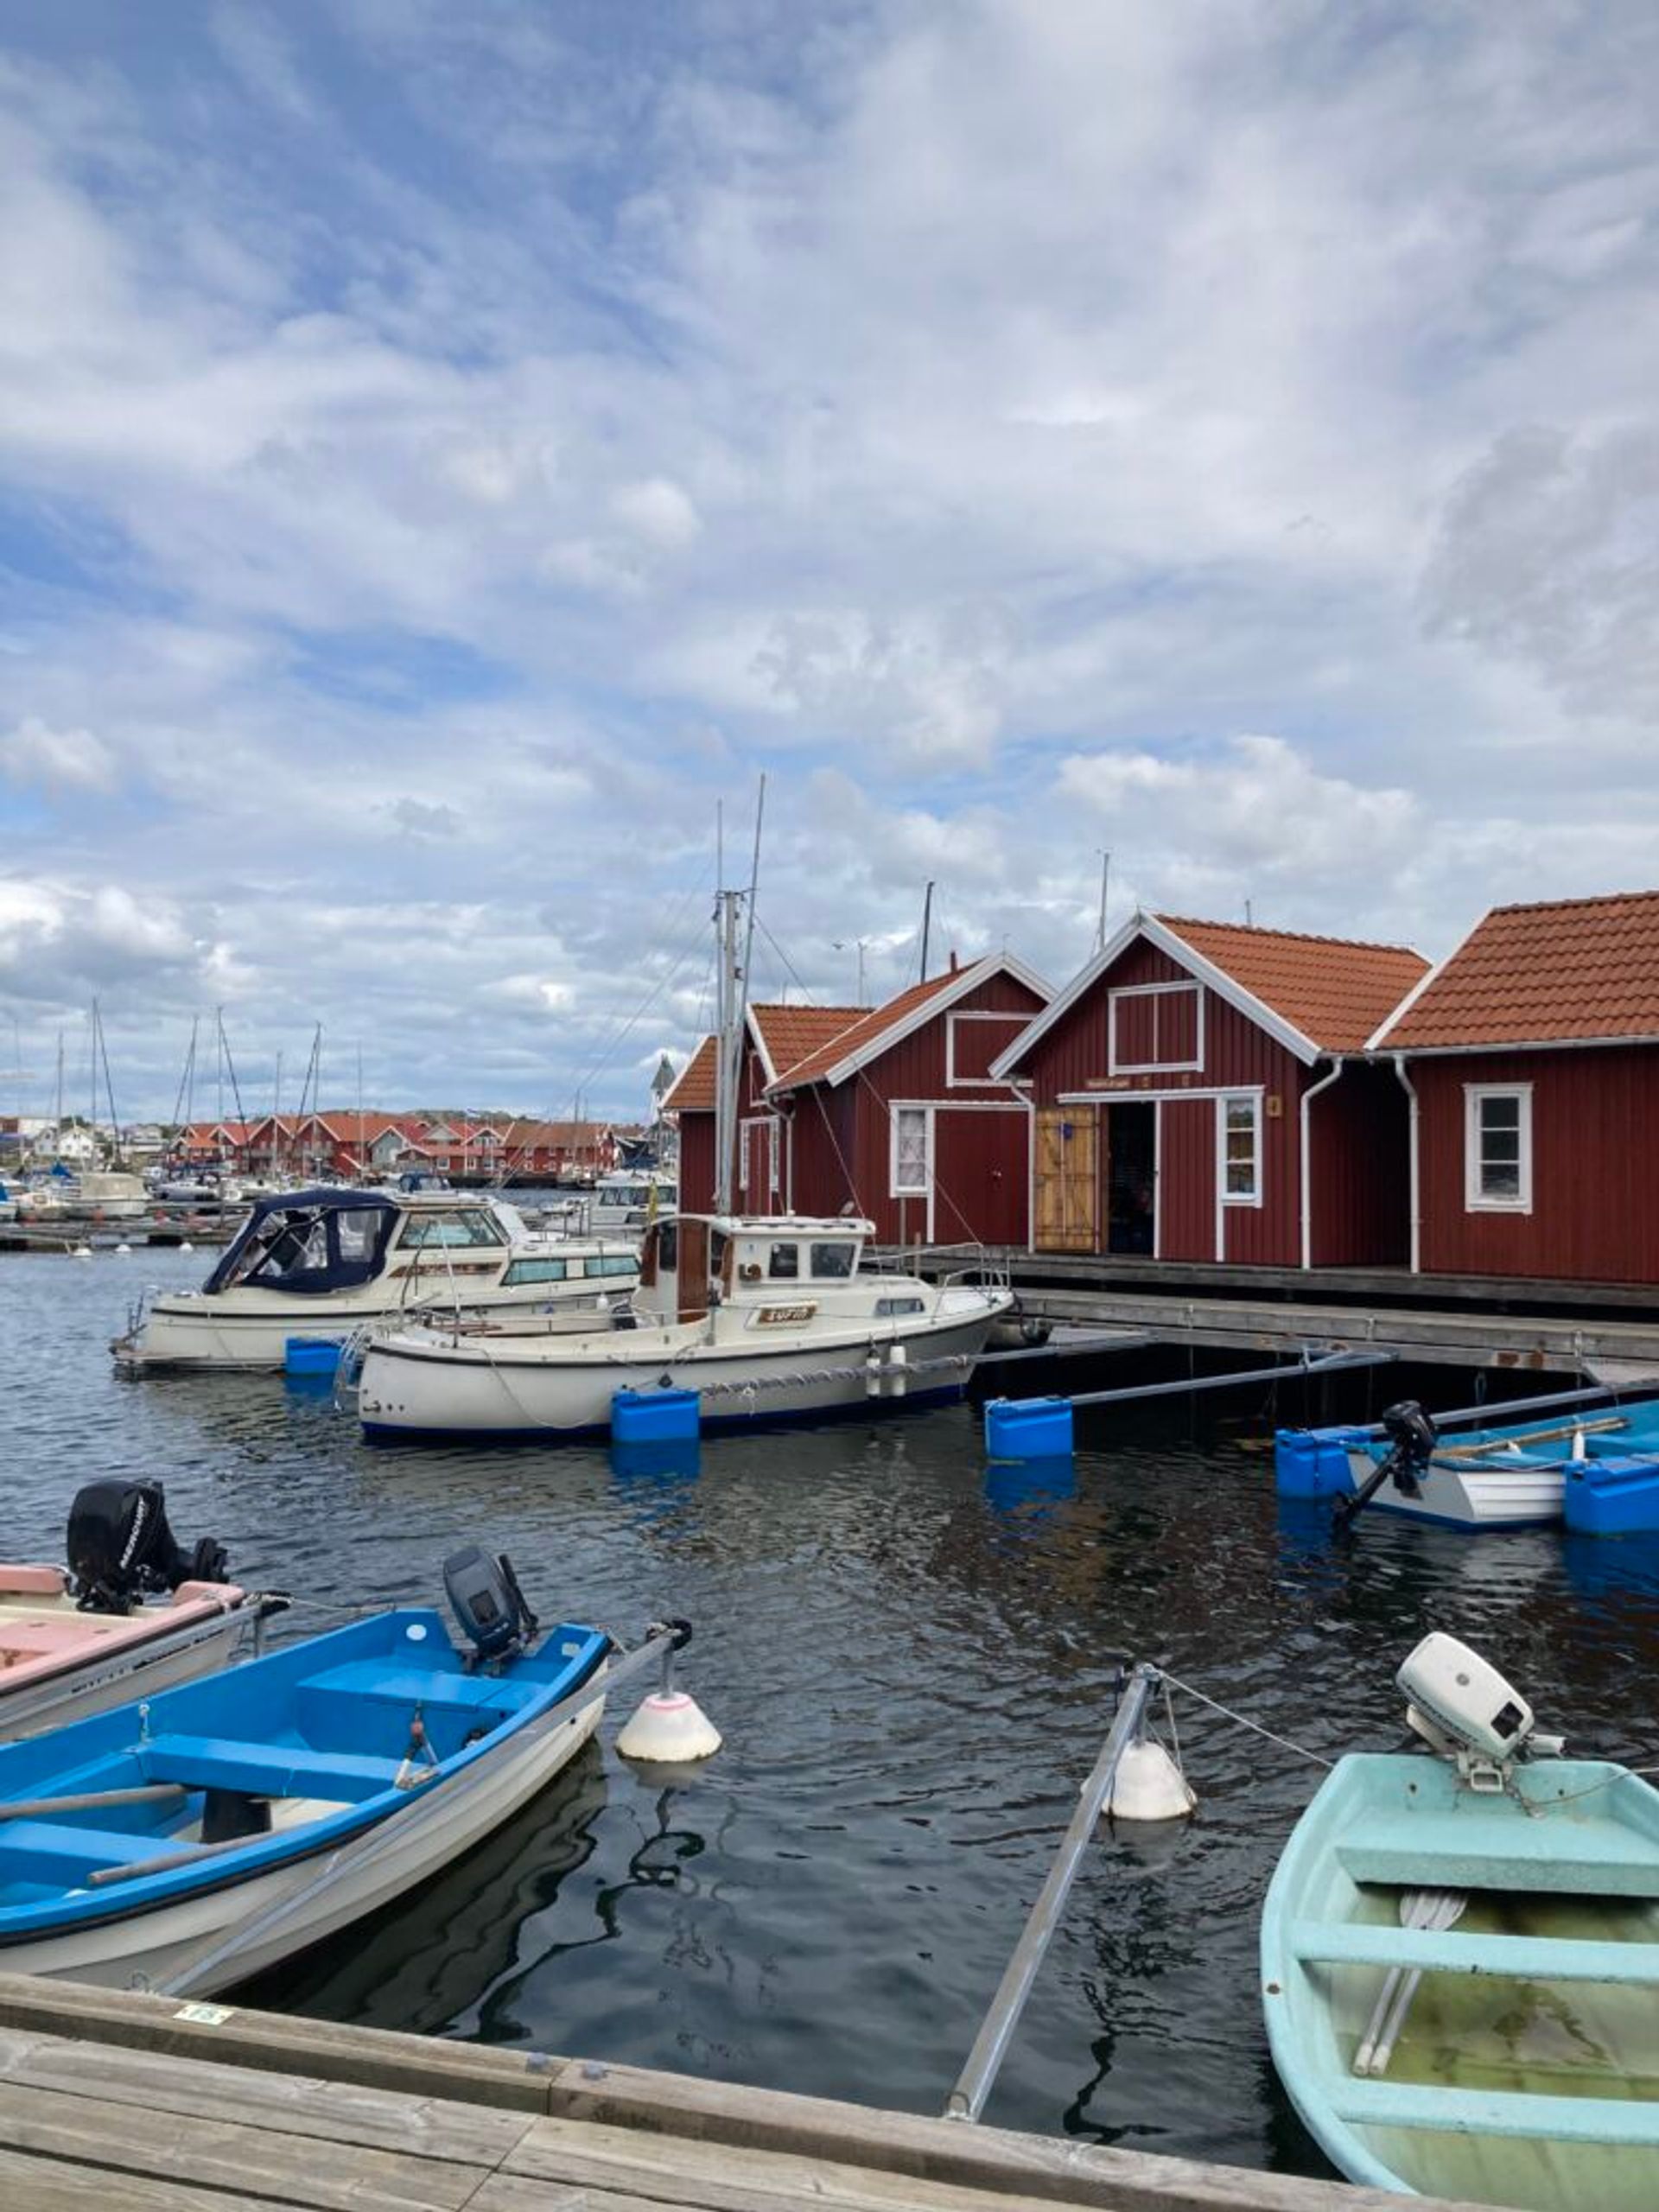 Boats on the sea with red cottages in the background.